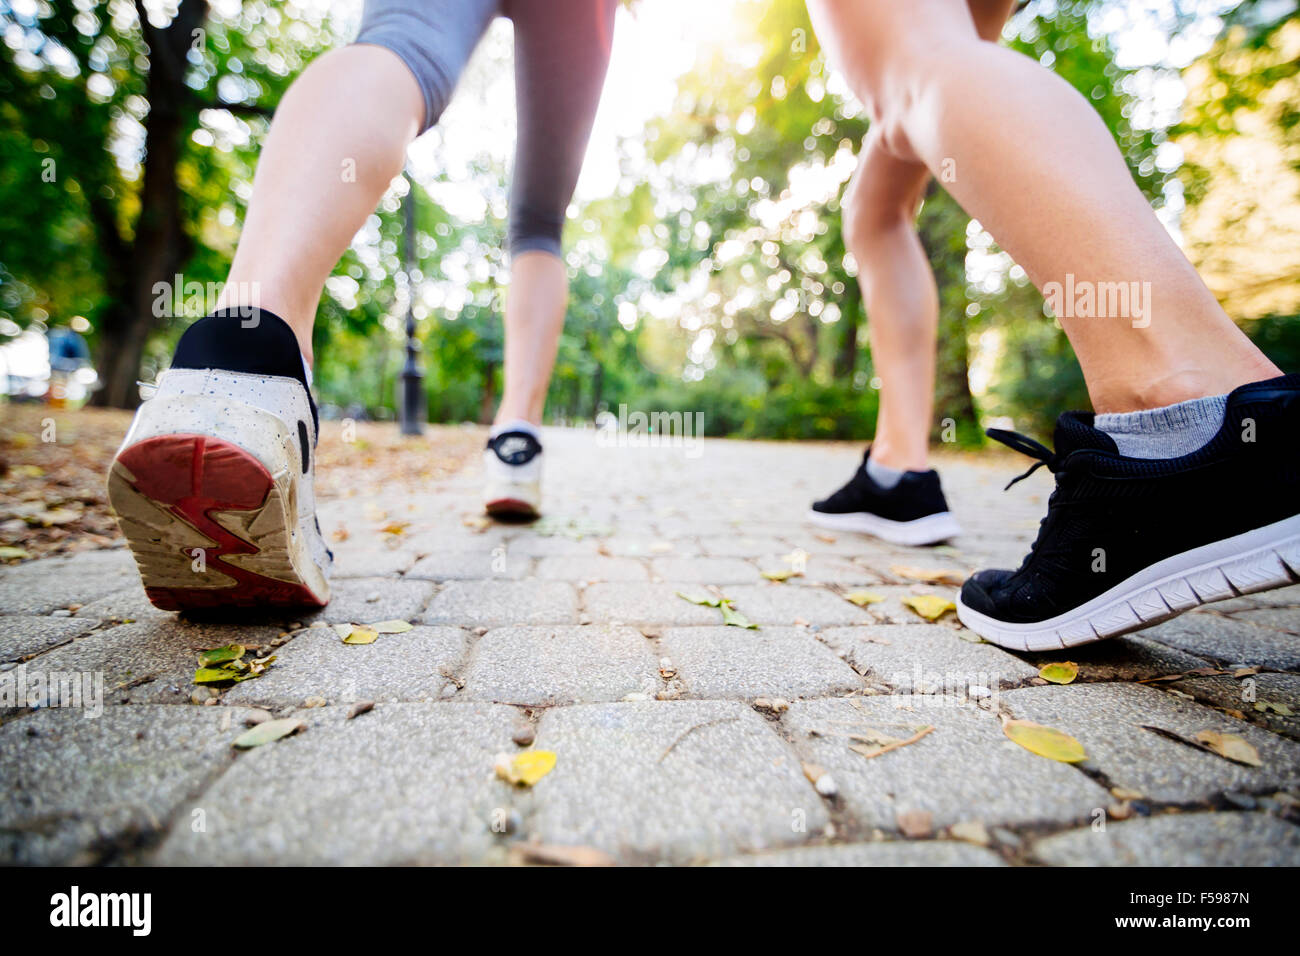 Closeup of joggers feet while in action and running Stock Photo